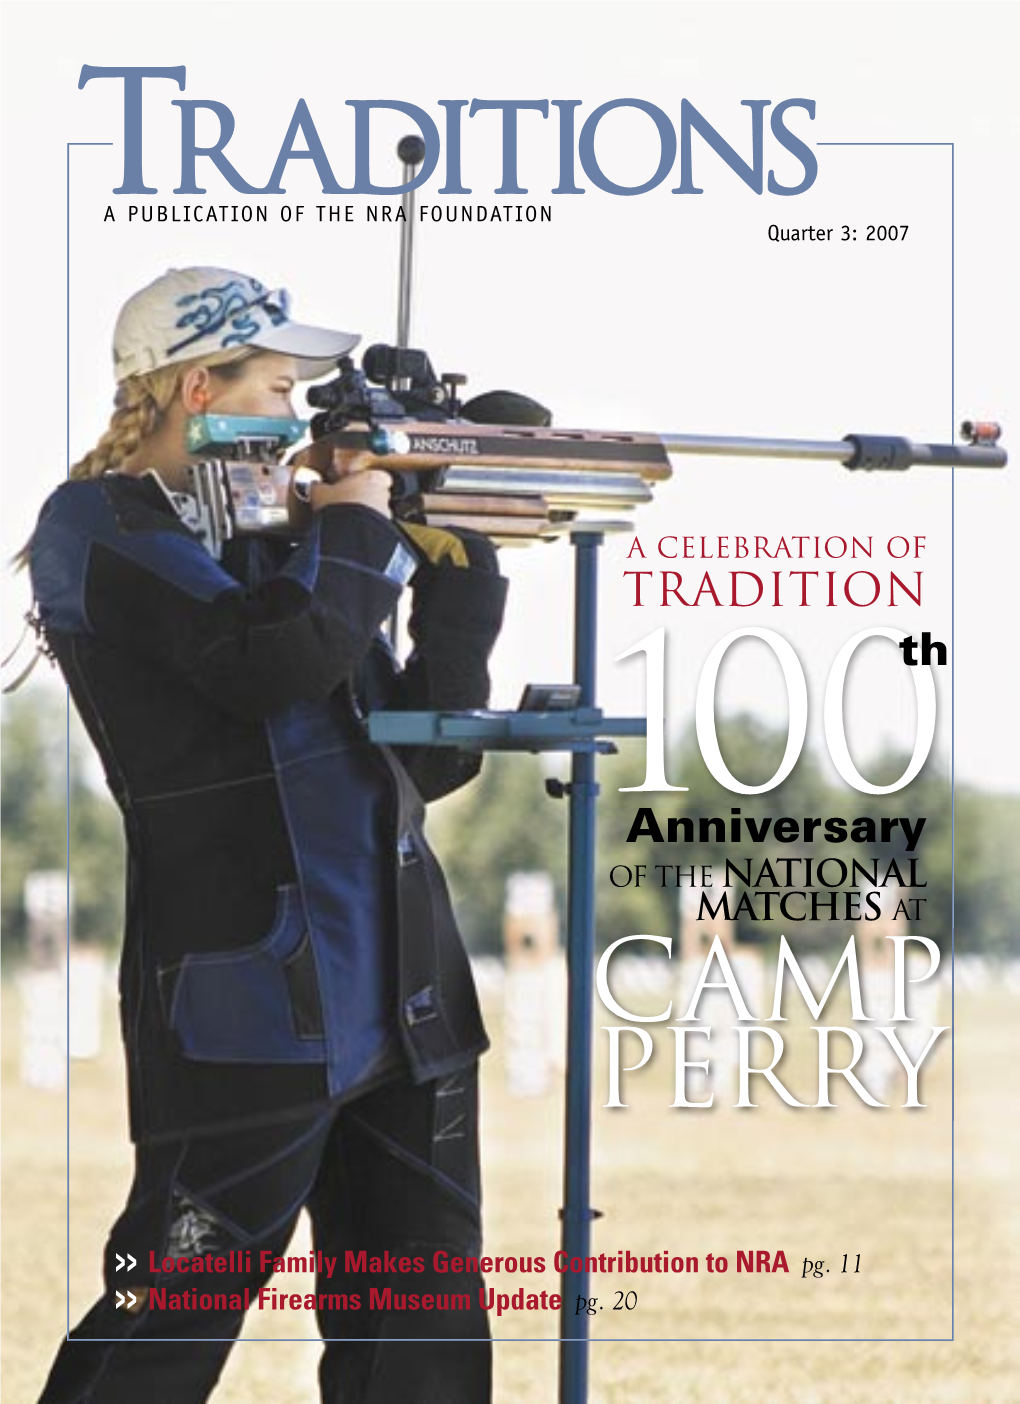 Anniversary of the National Matches at Camp Perry